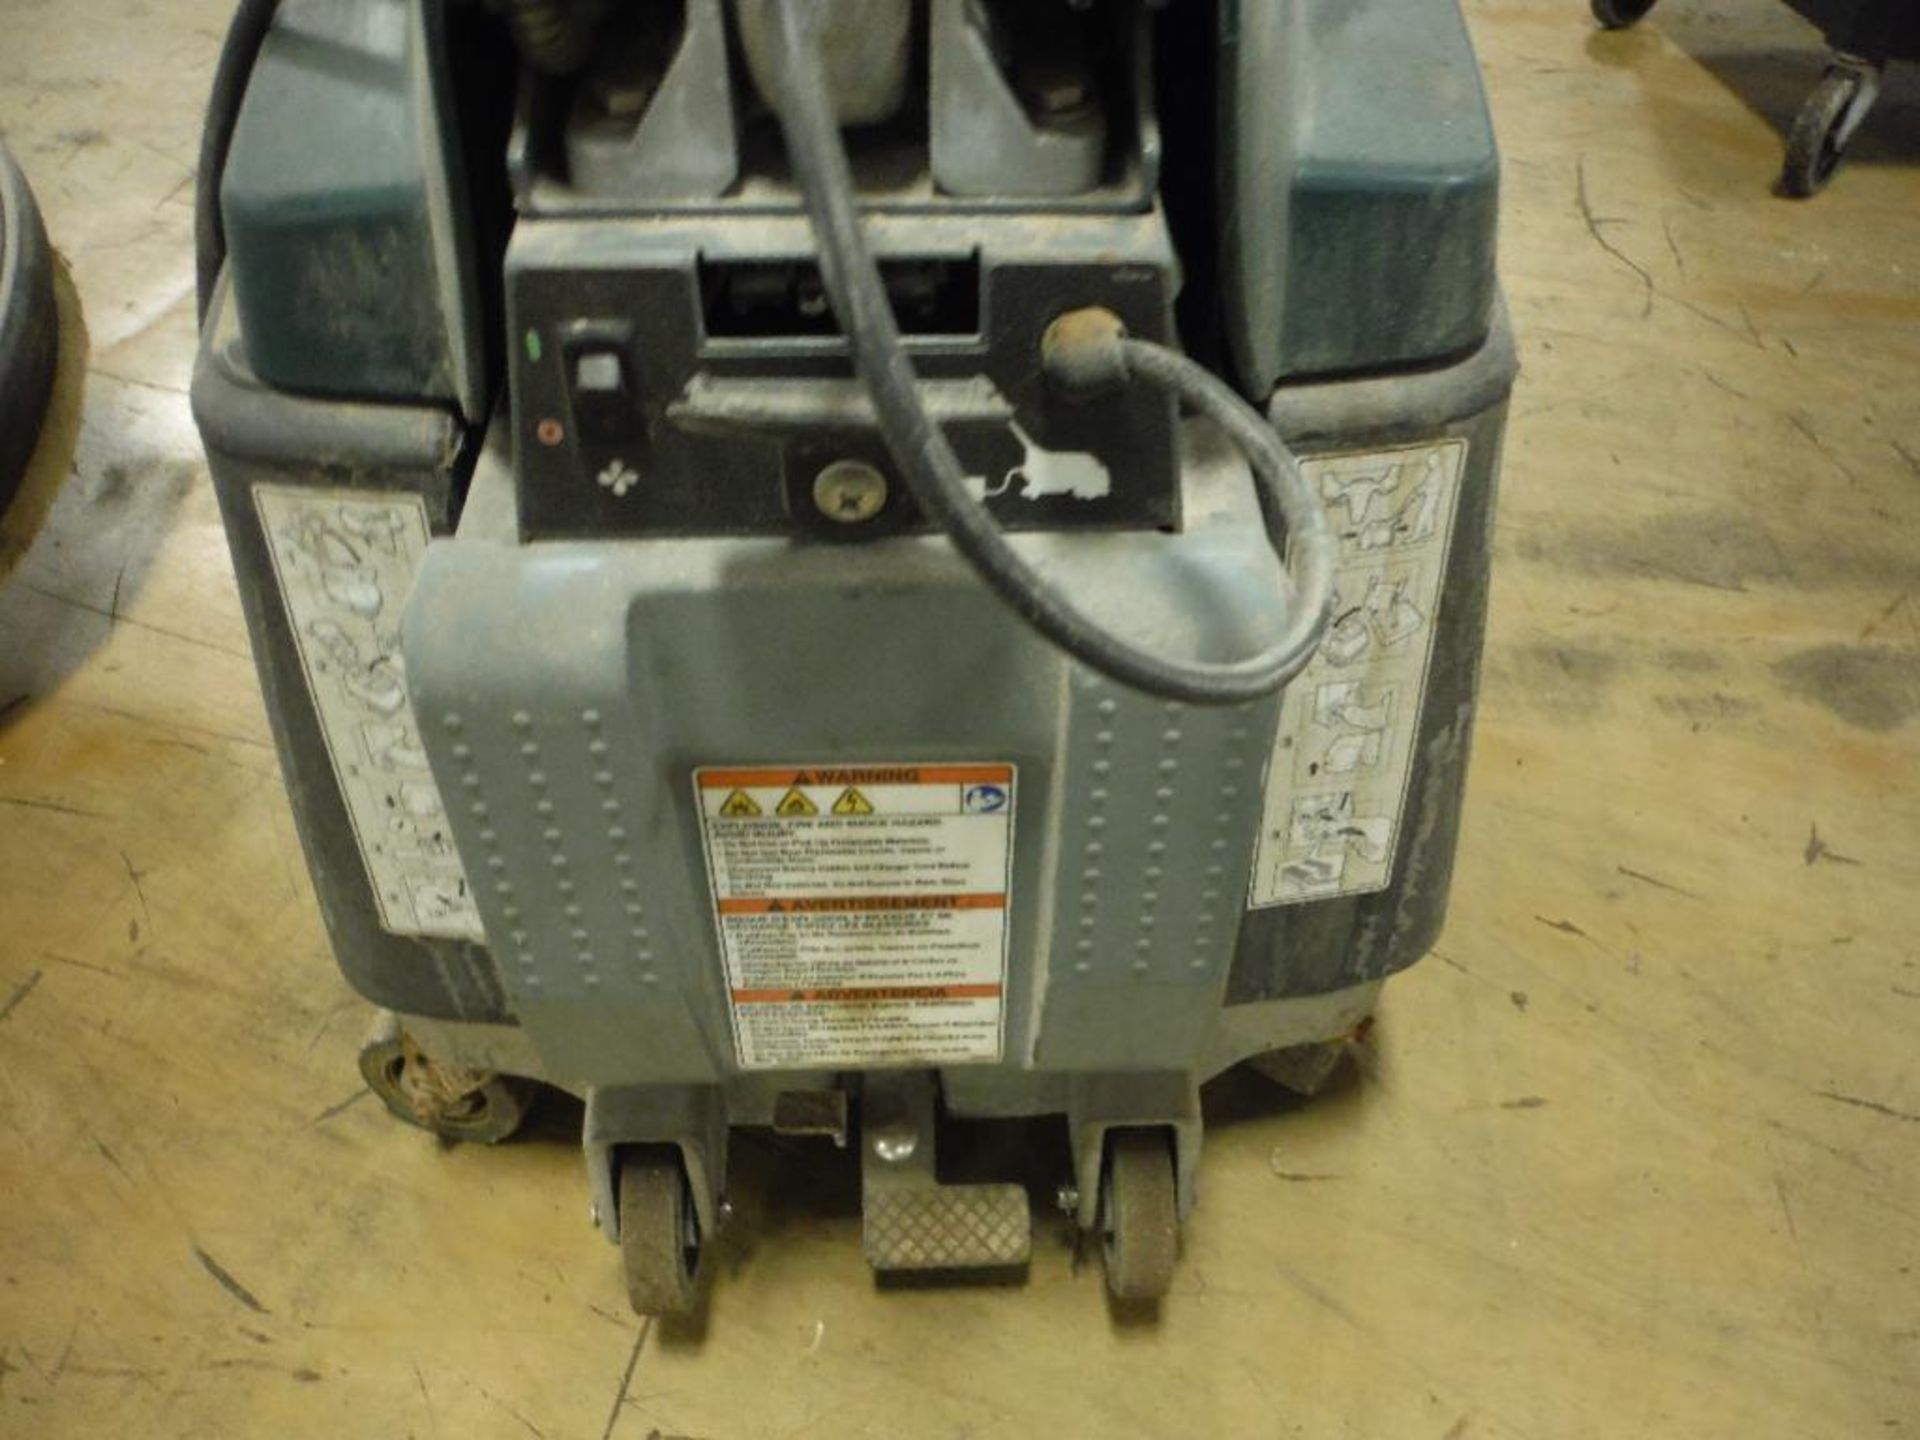 Nobles floor scrubber, Model Speed Scrubber, w/ charger. Rigging Fee: $25 - Image 5 of 6